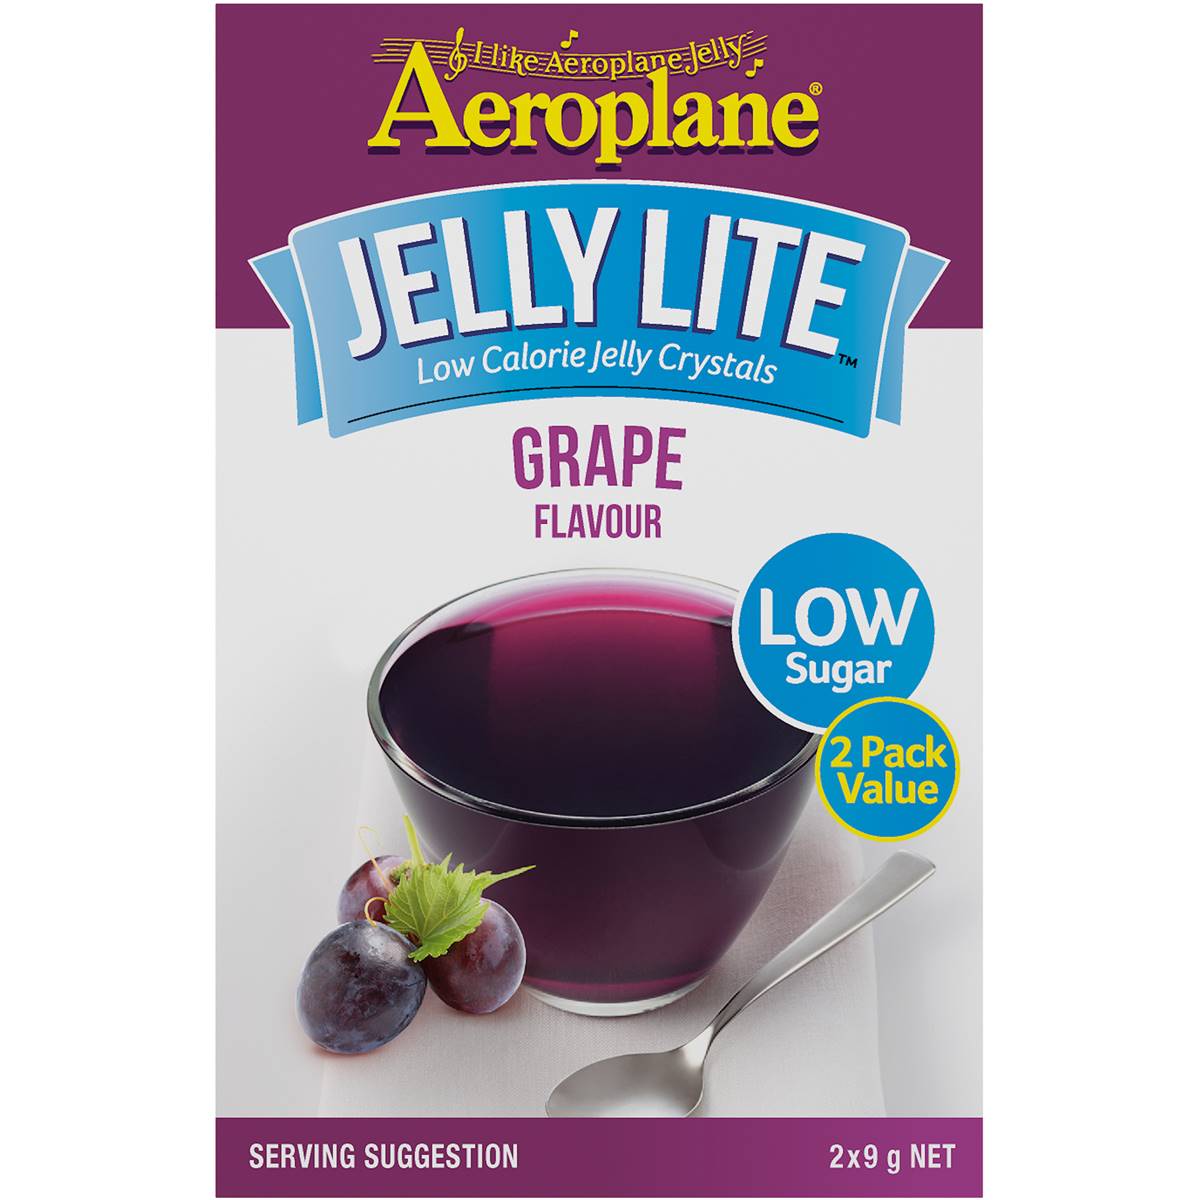 Calories in Aeroplane Jelly Lite Grape Flavour Low Calorie Jelly Crystals